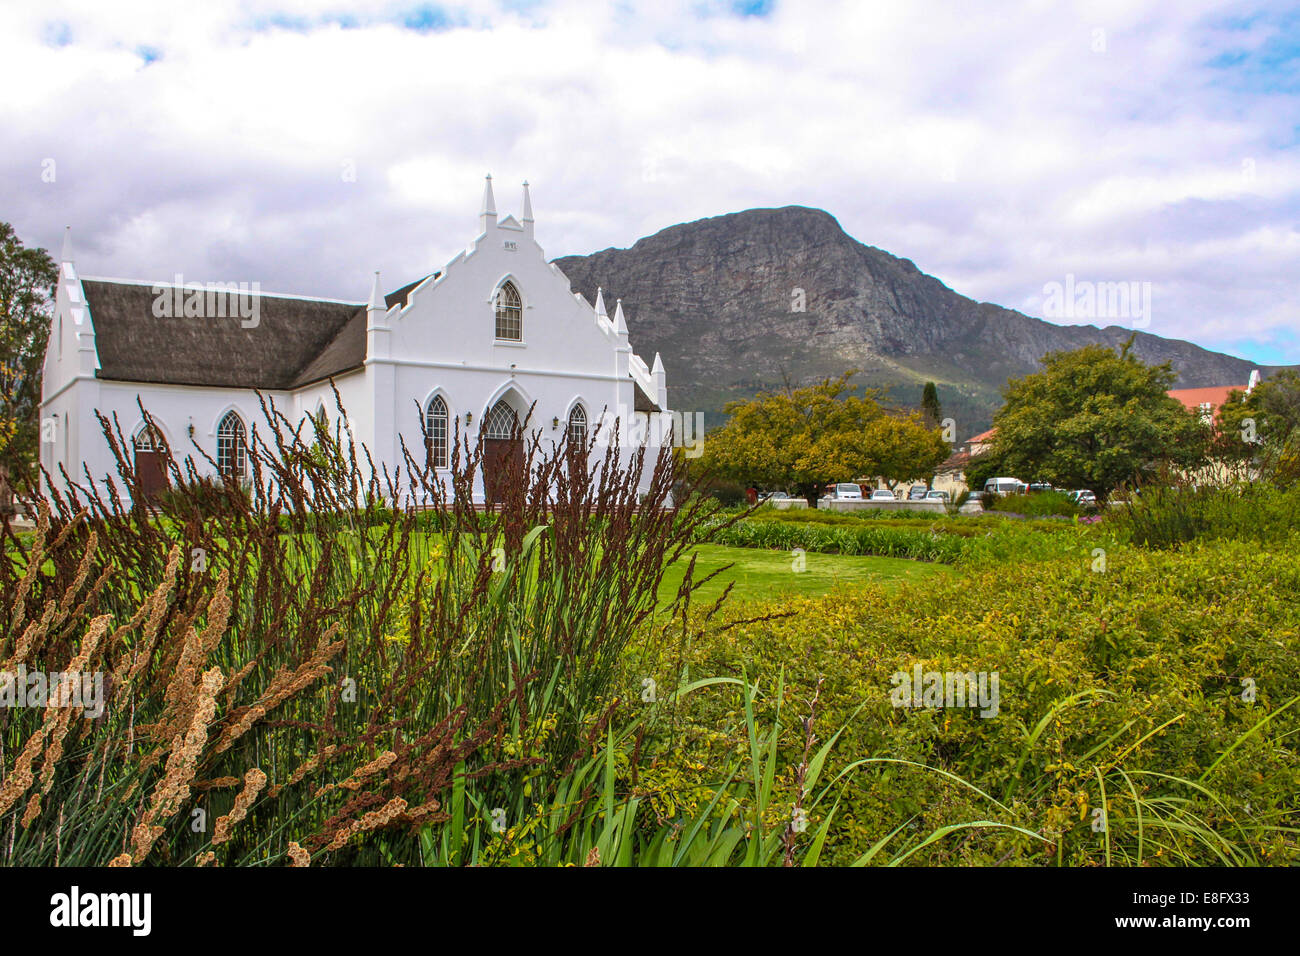 The Dutch Reformed Church,Built in 1847 in Franschoek,South Africa Stock Photo